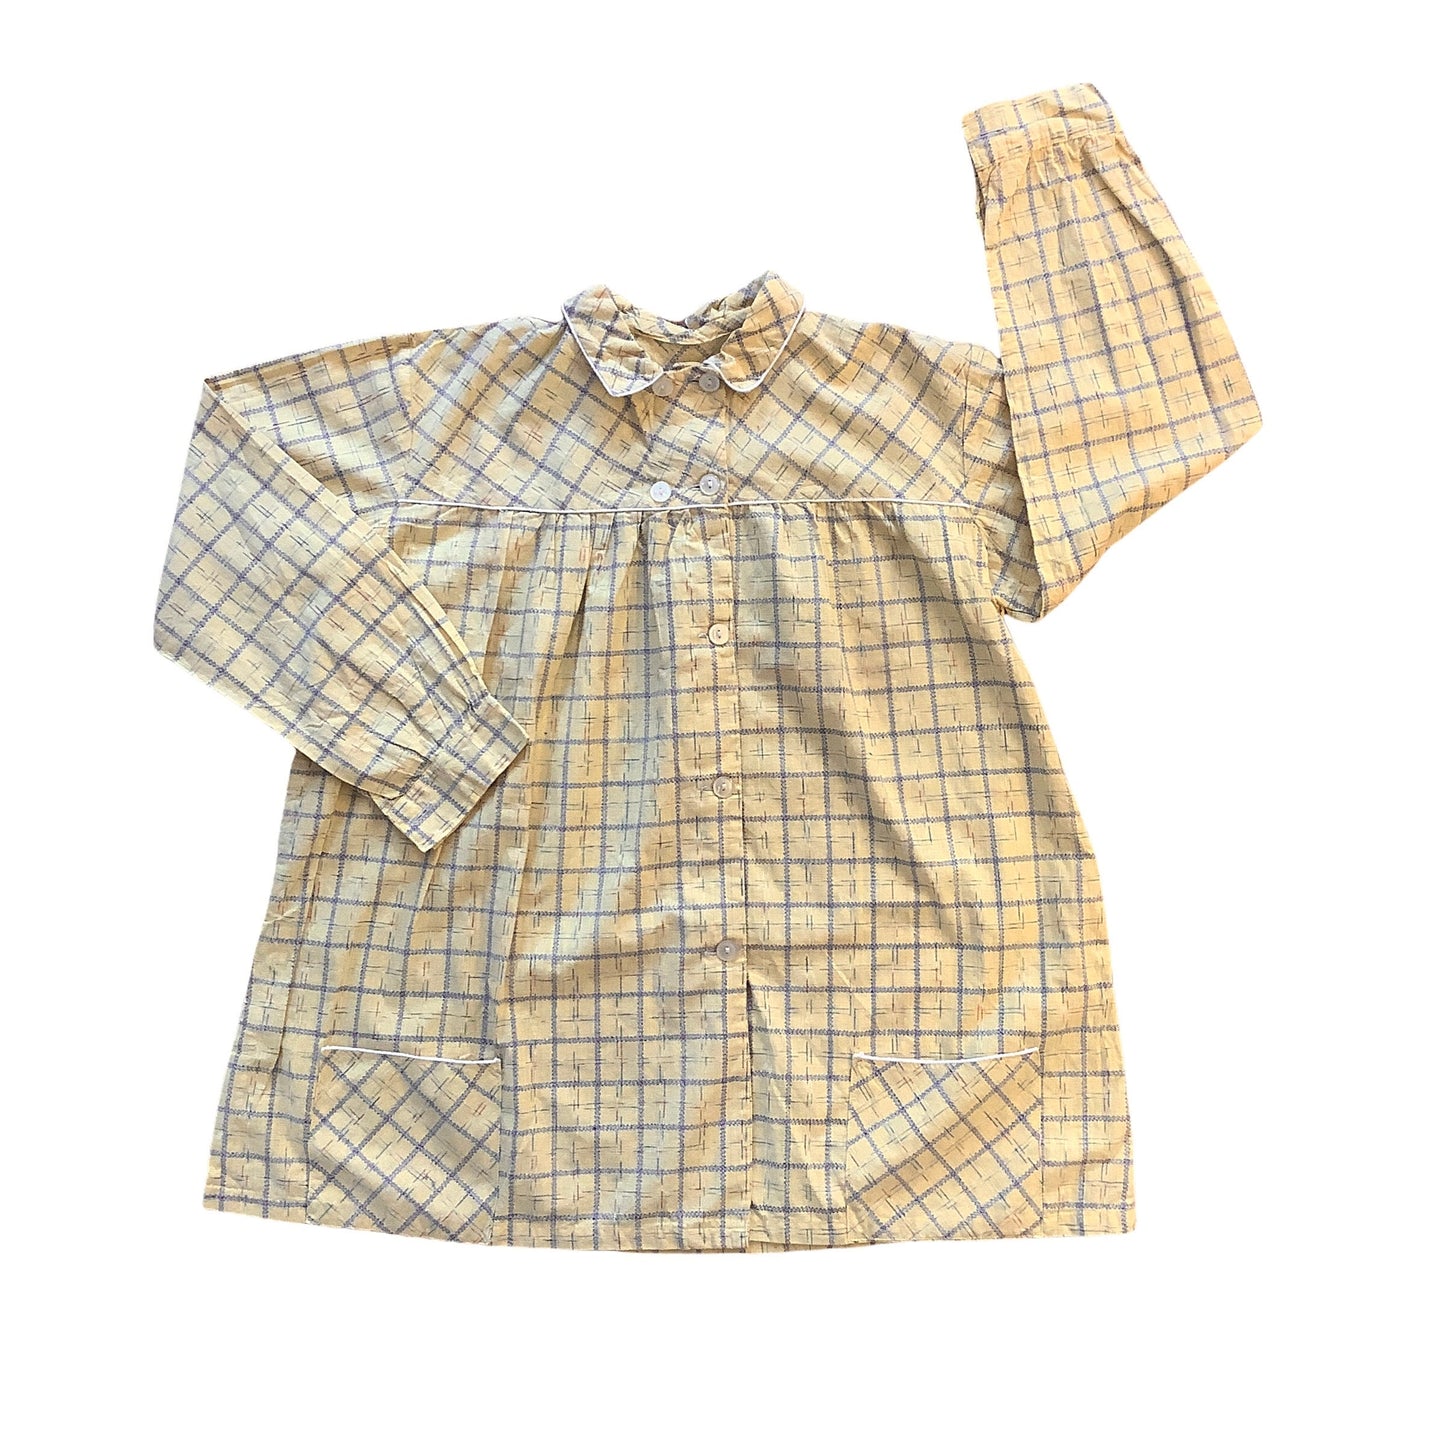 Vintage 1960s Yellow Shirt / Blouse  8-10Y